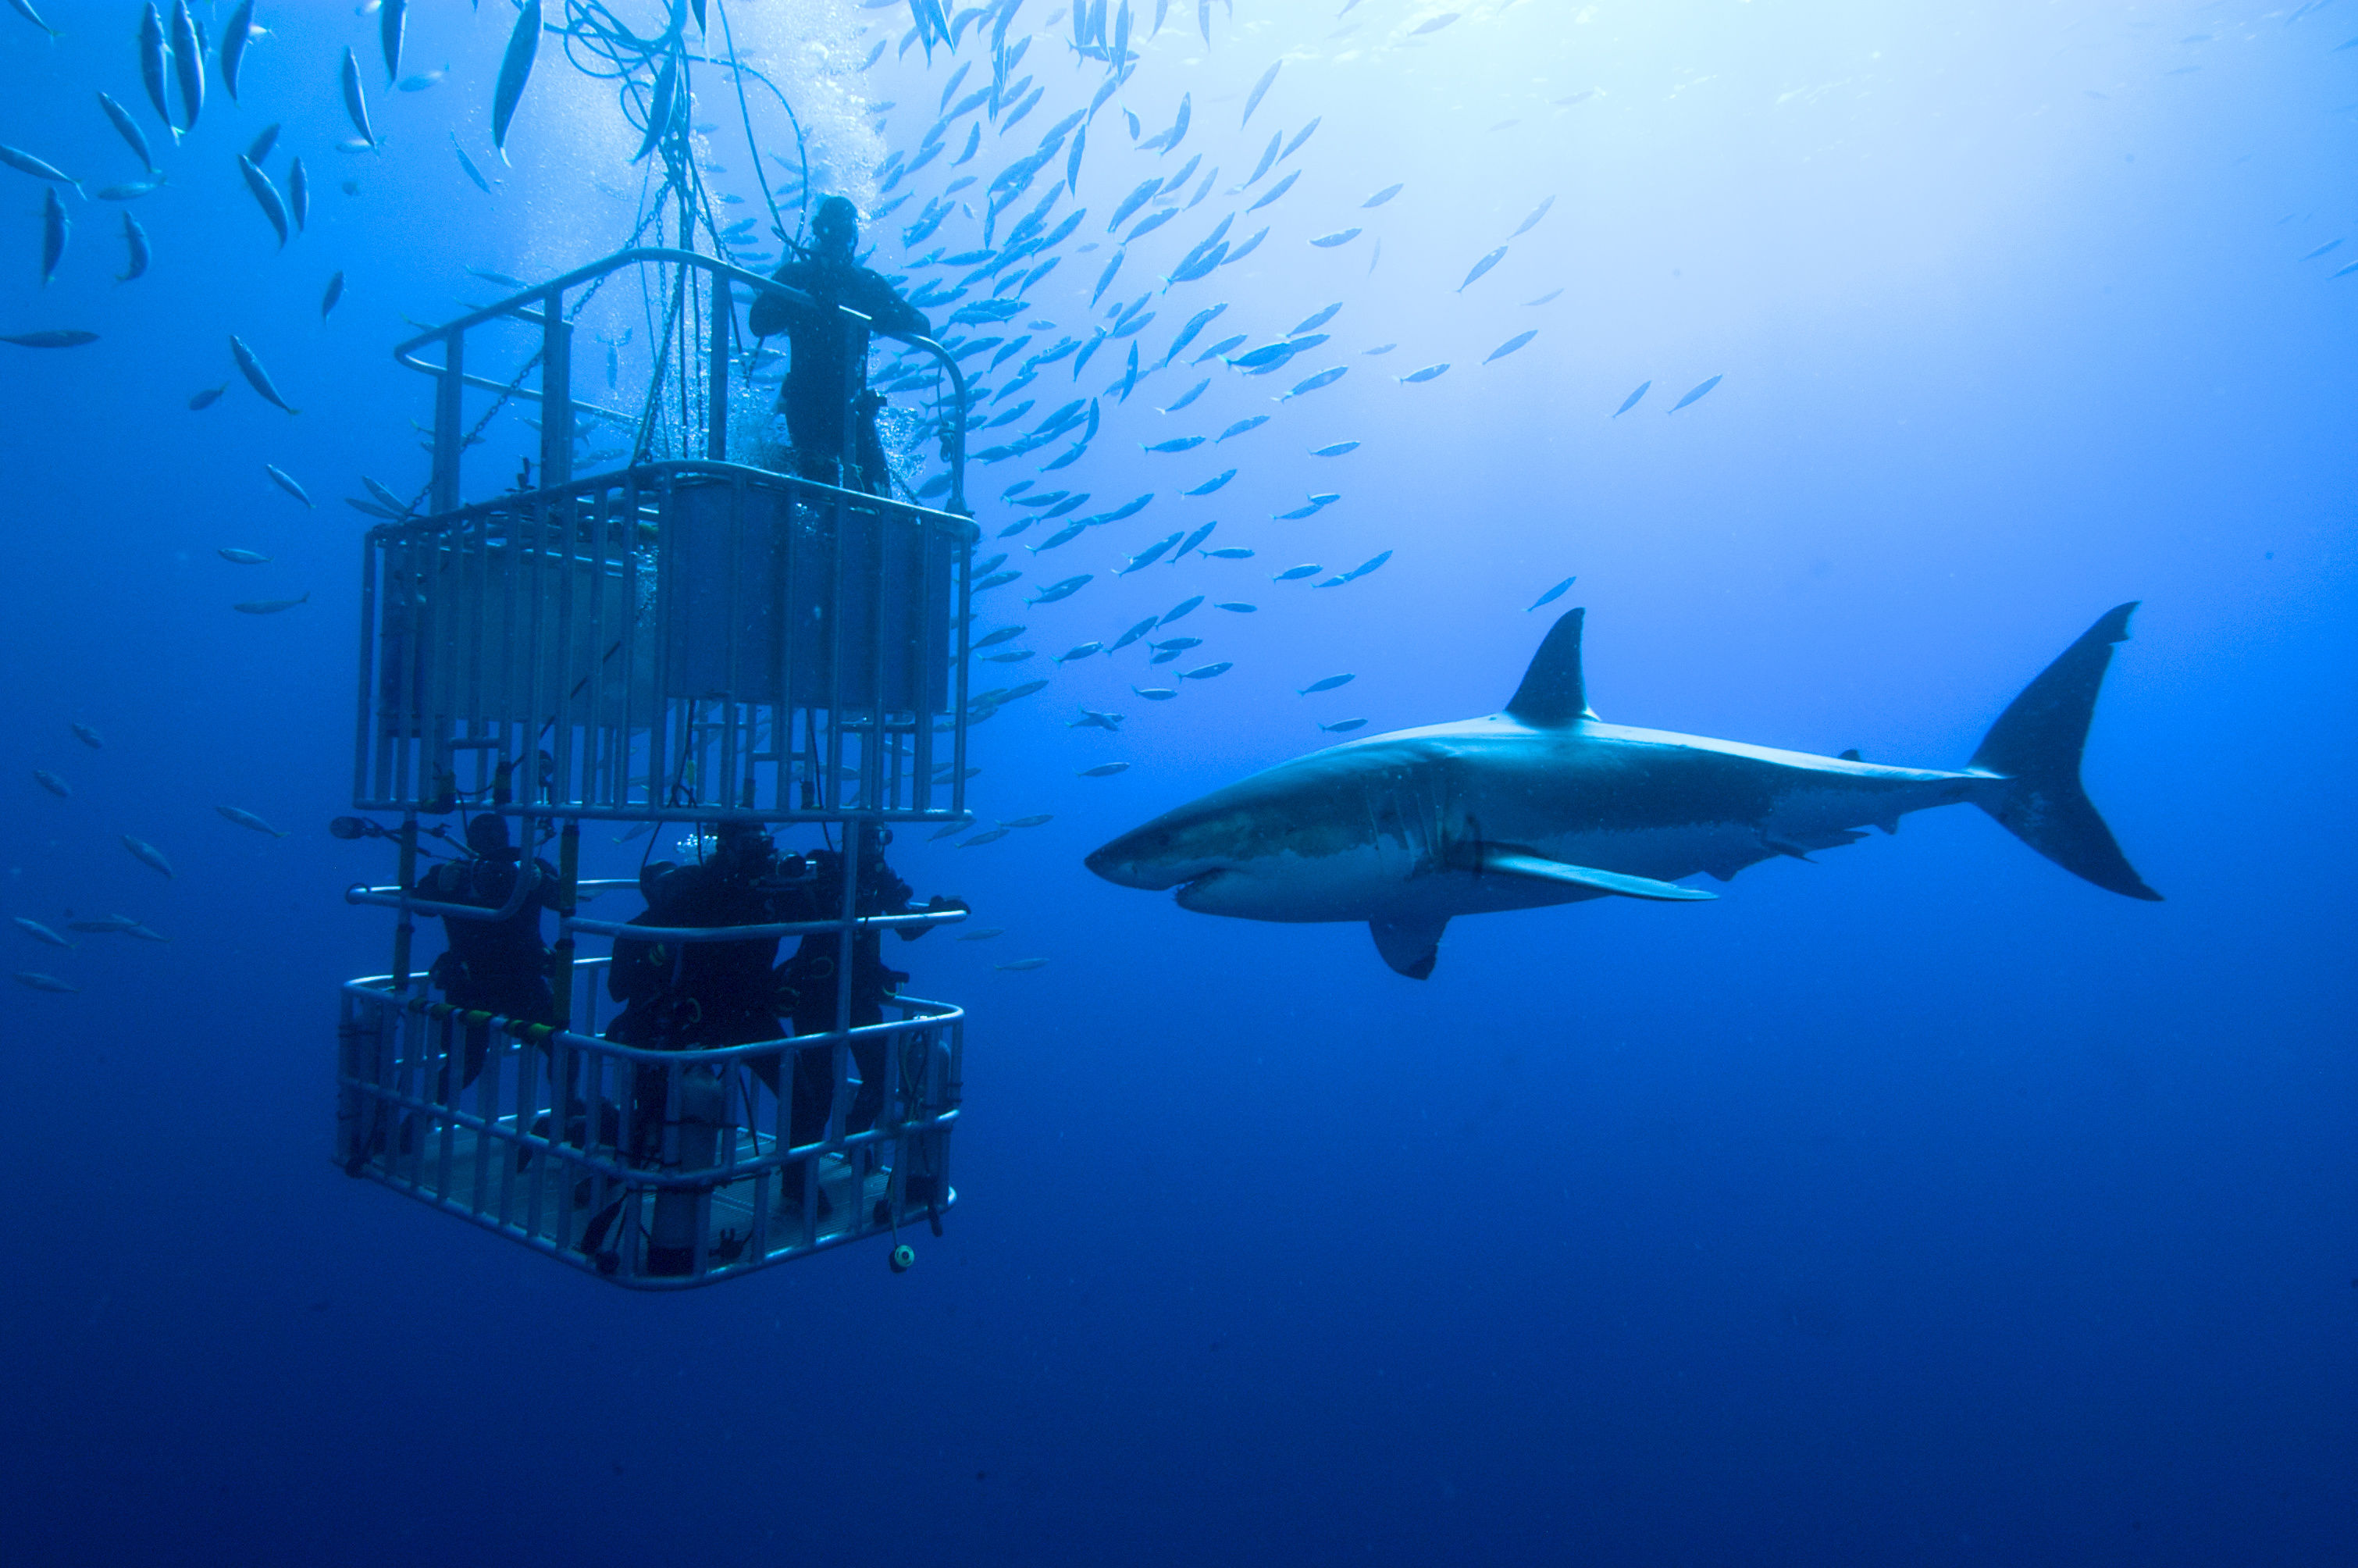 Scuba divers in cage while great white shark swims towards them in clear blue water in Baja California, Mexico.